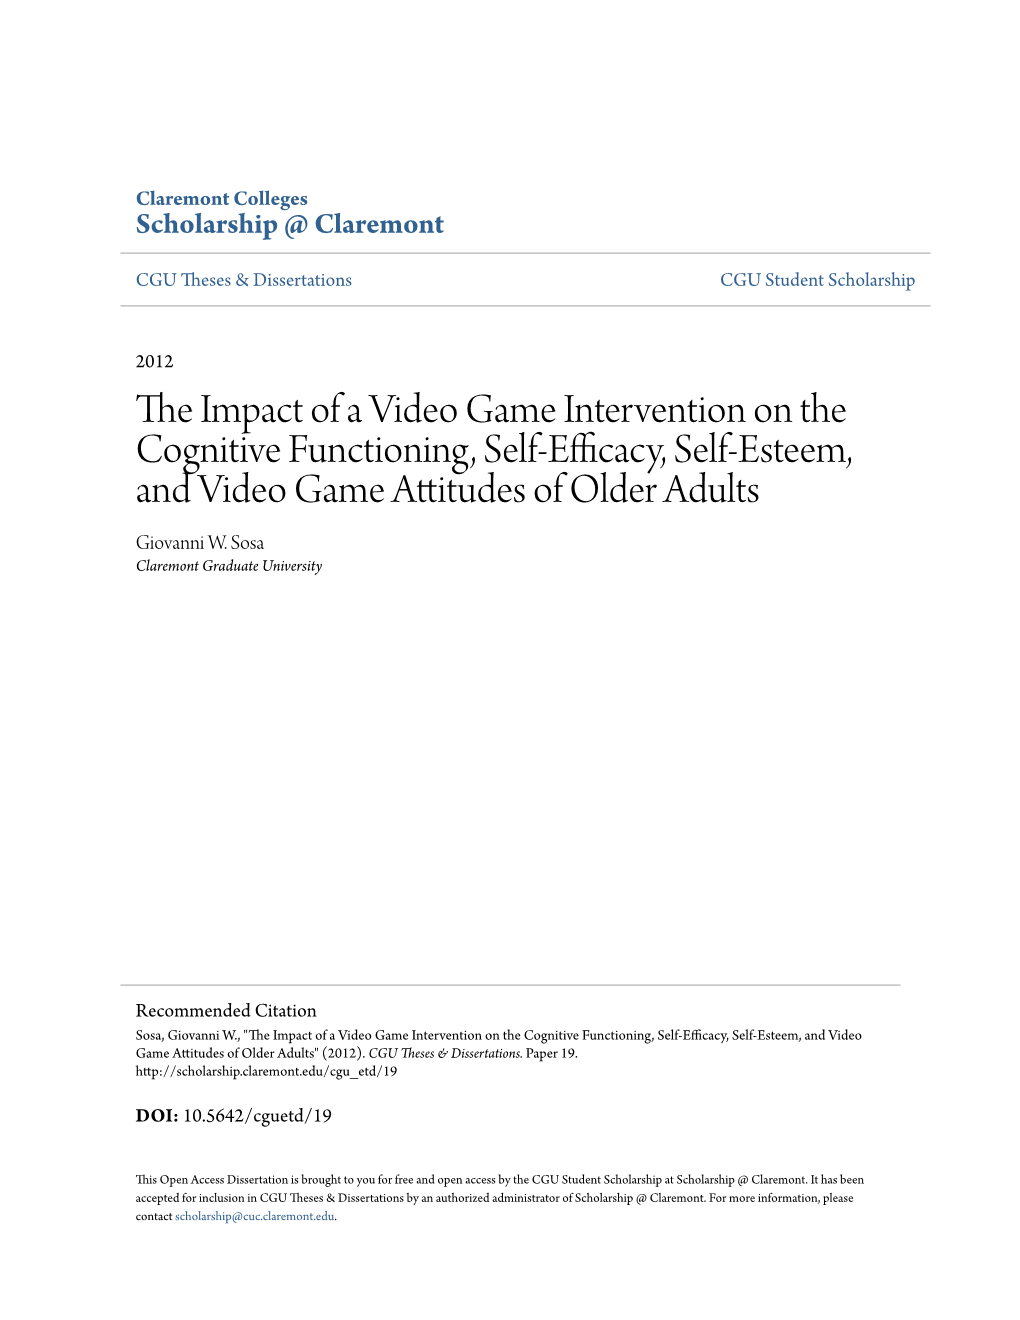 The Impact of a Video Game Intervention on the Cognitive Functioning, Self